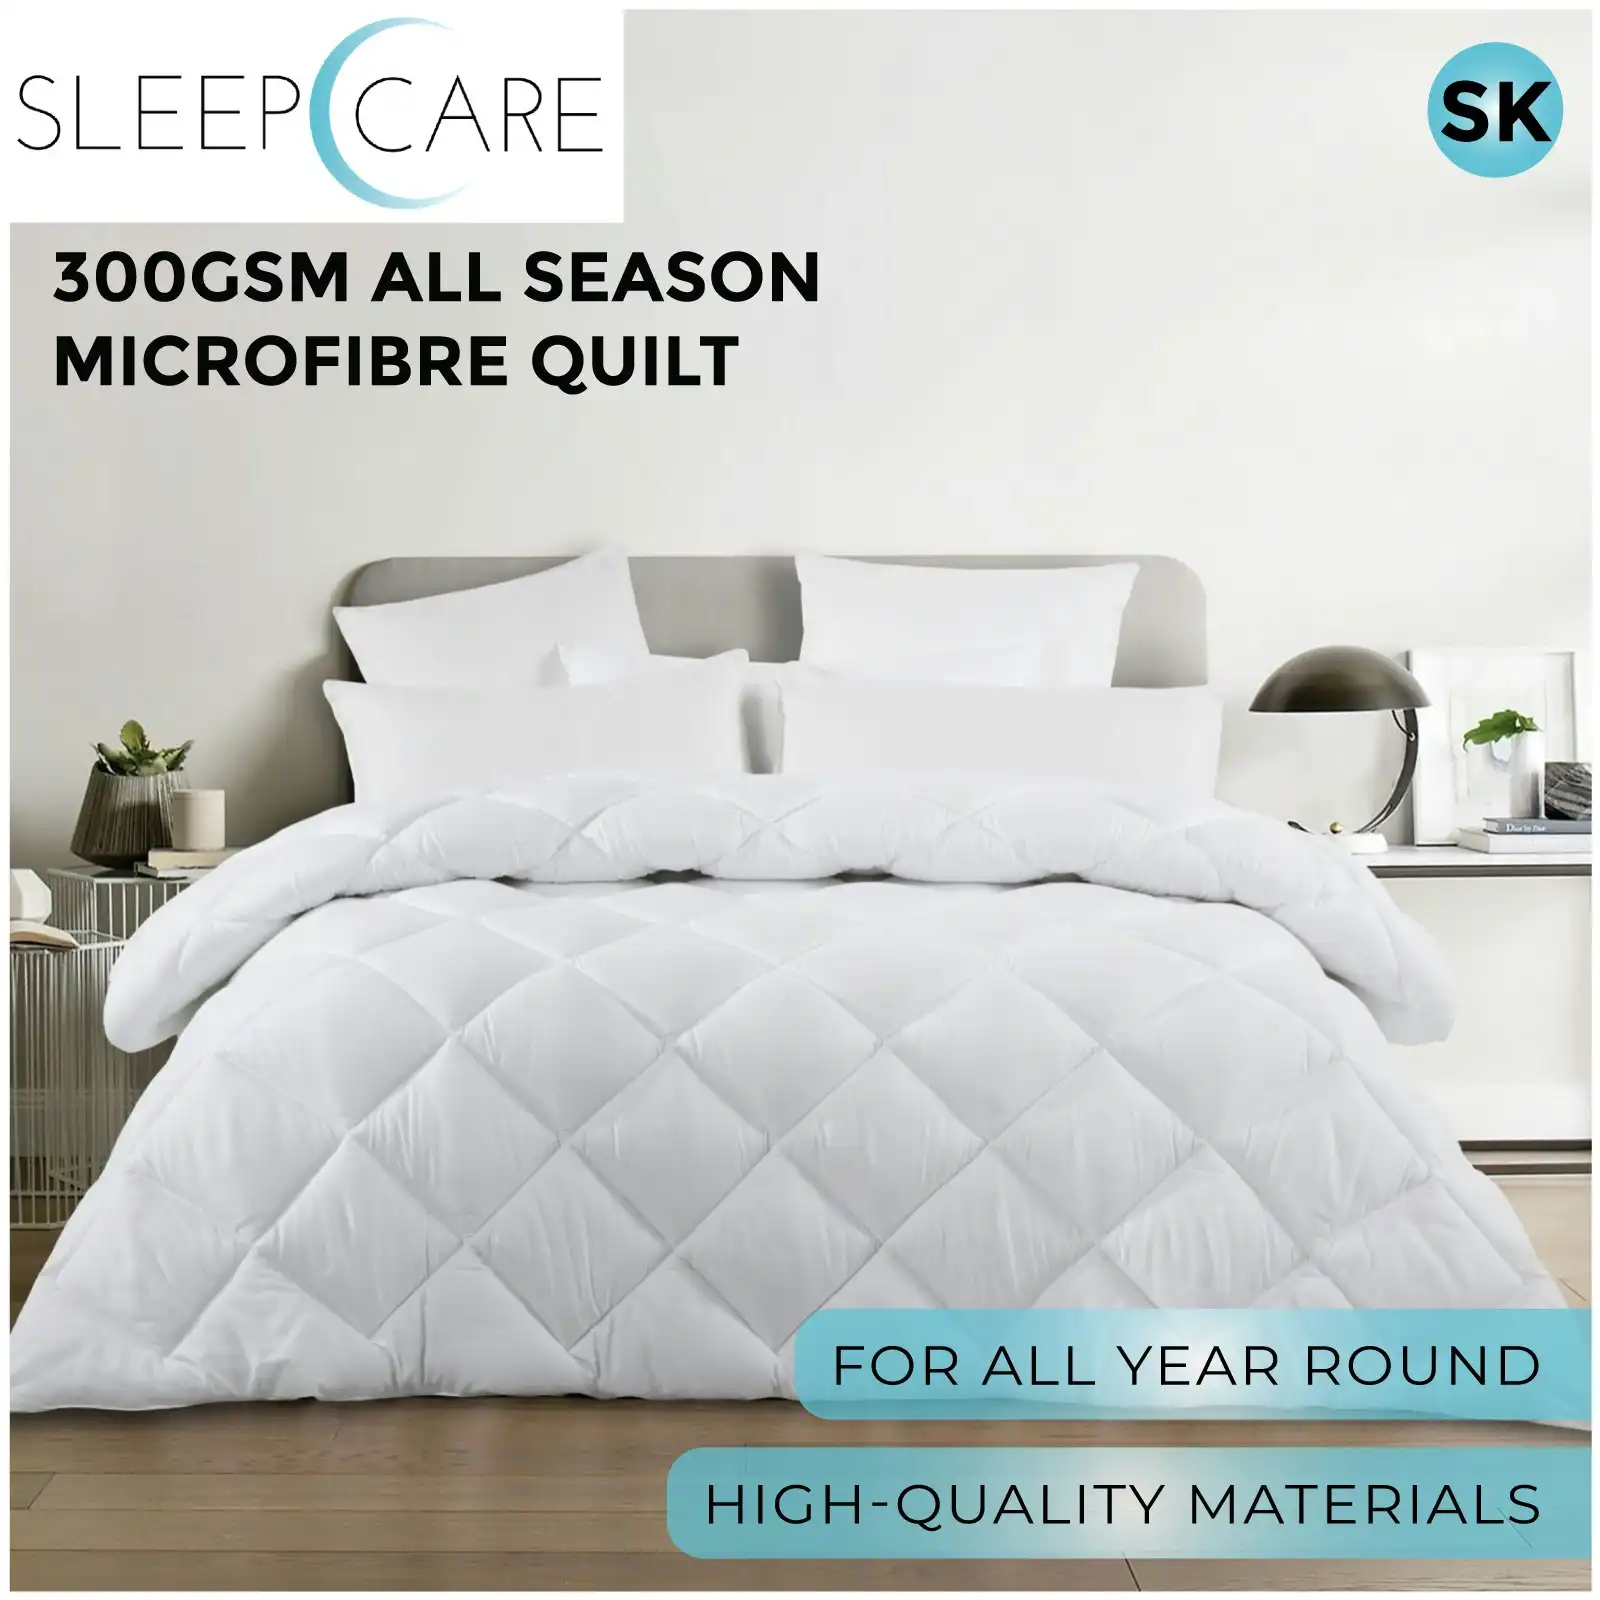 Sleepcare 300GSM All Season Microfibre Quilt Super King Bed